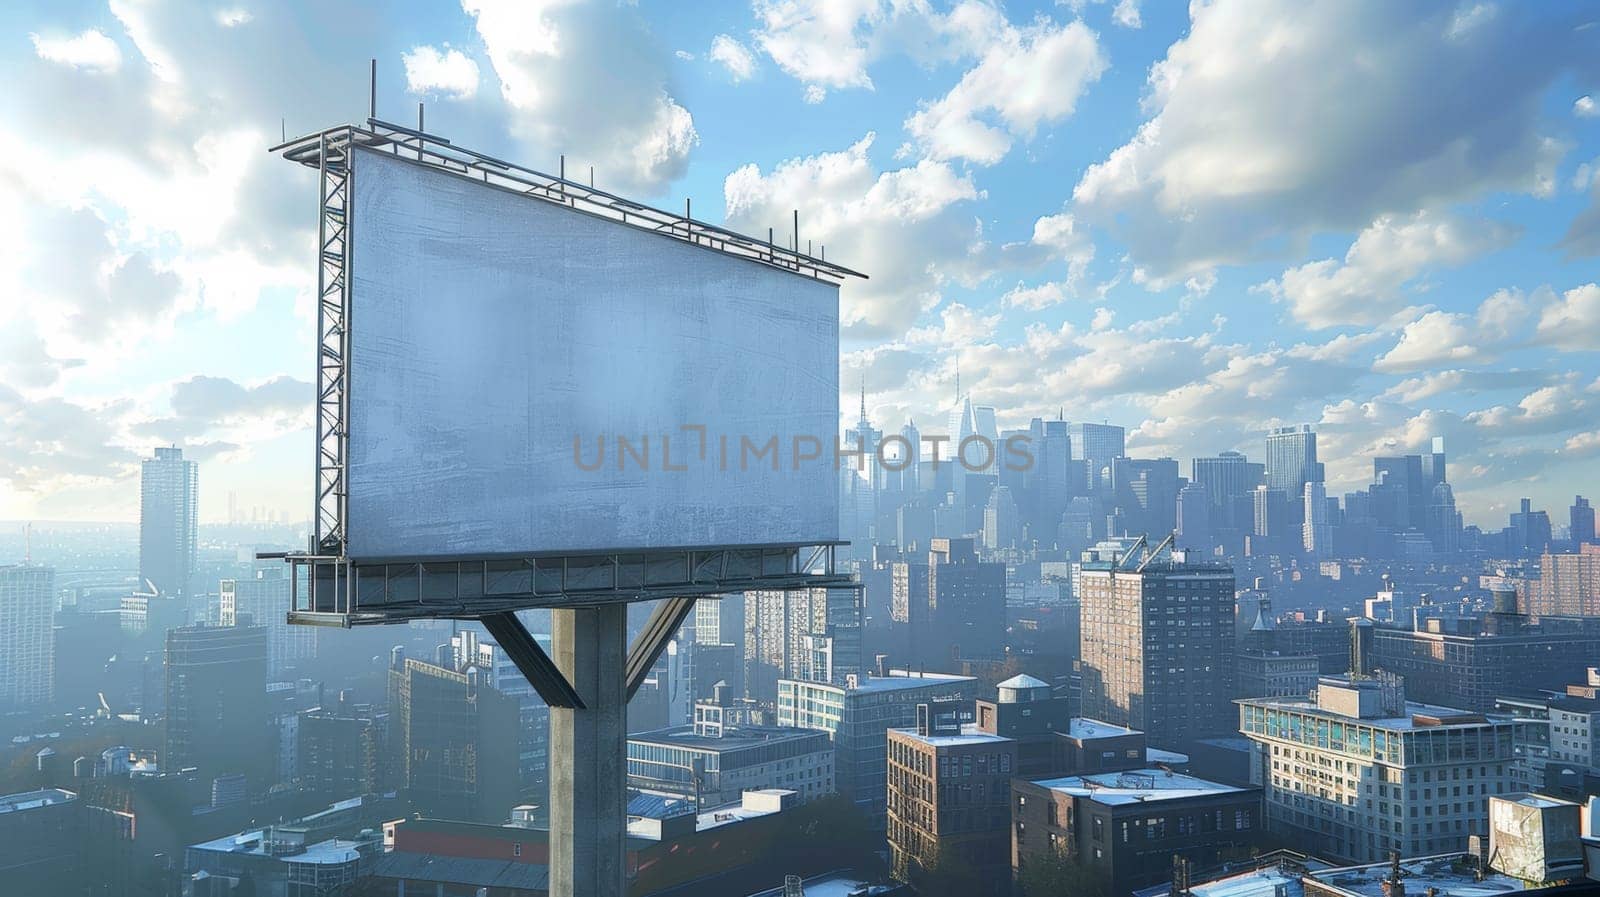 A billboard is shown in the sky over a city